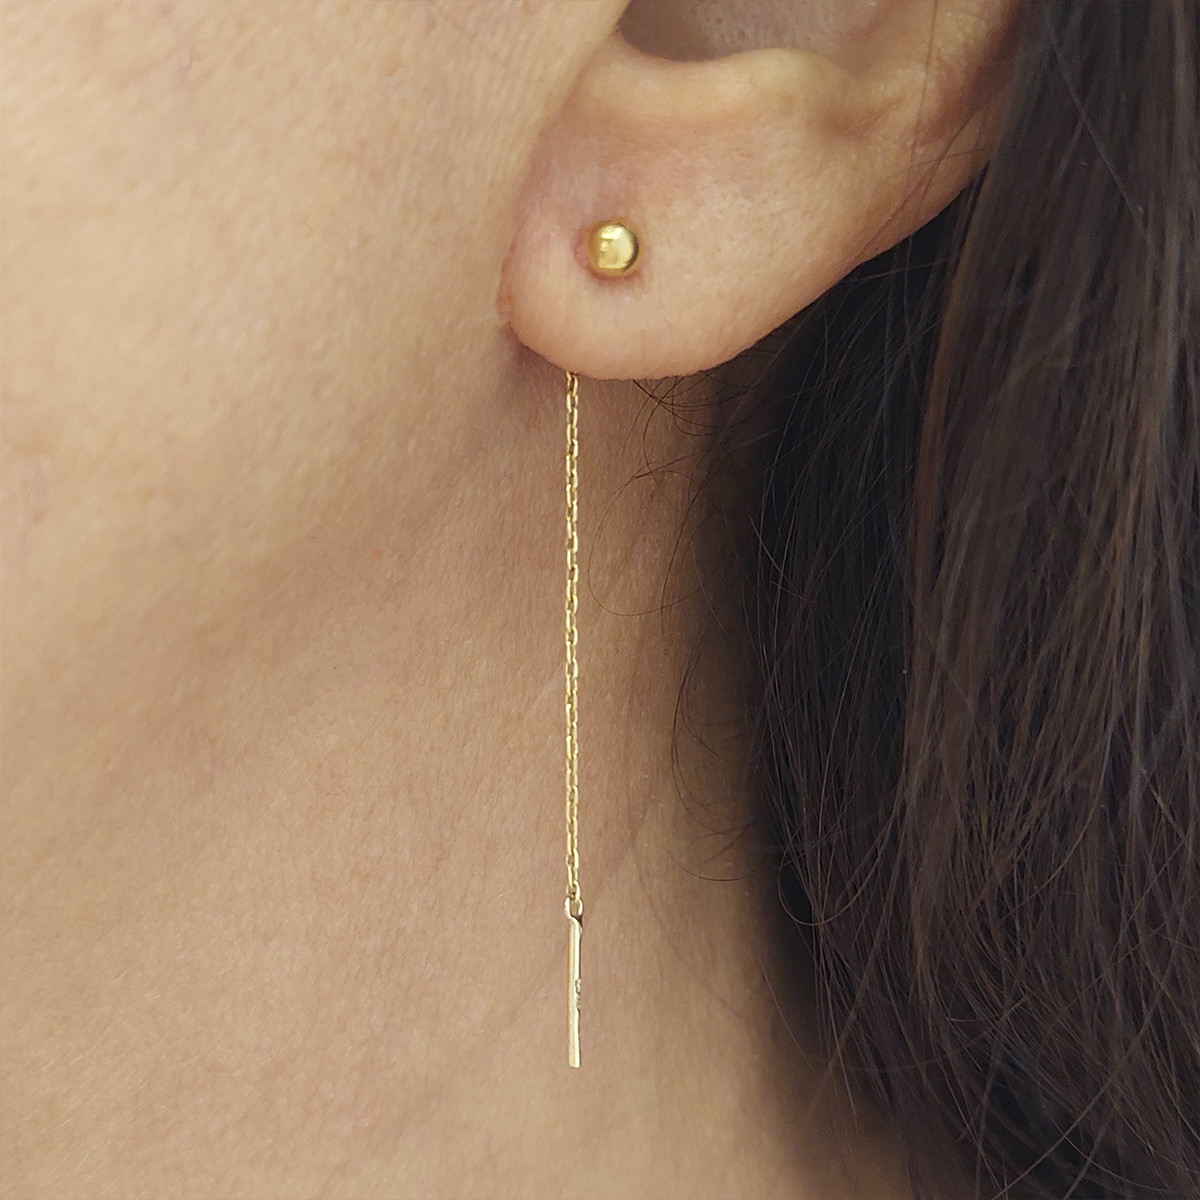 Rose gold chain earrings by Amoliconcepts | The Secret Label